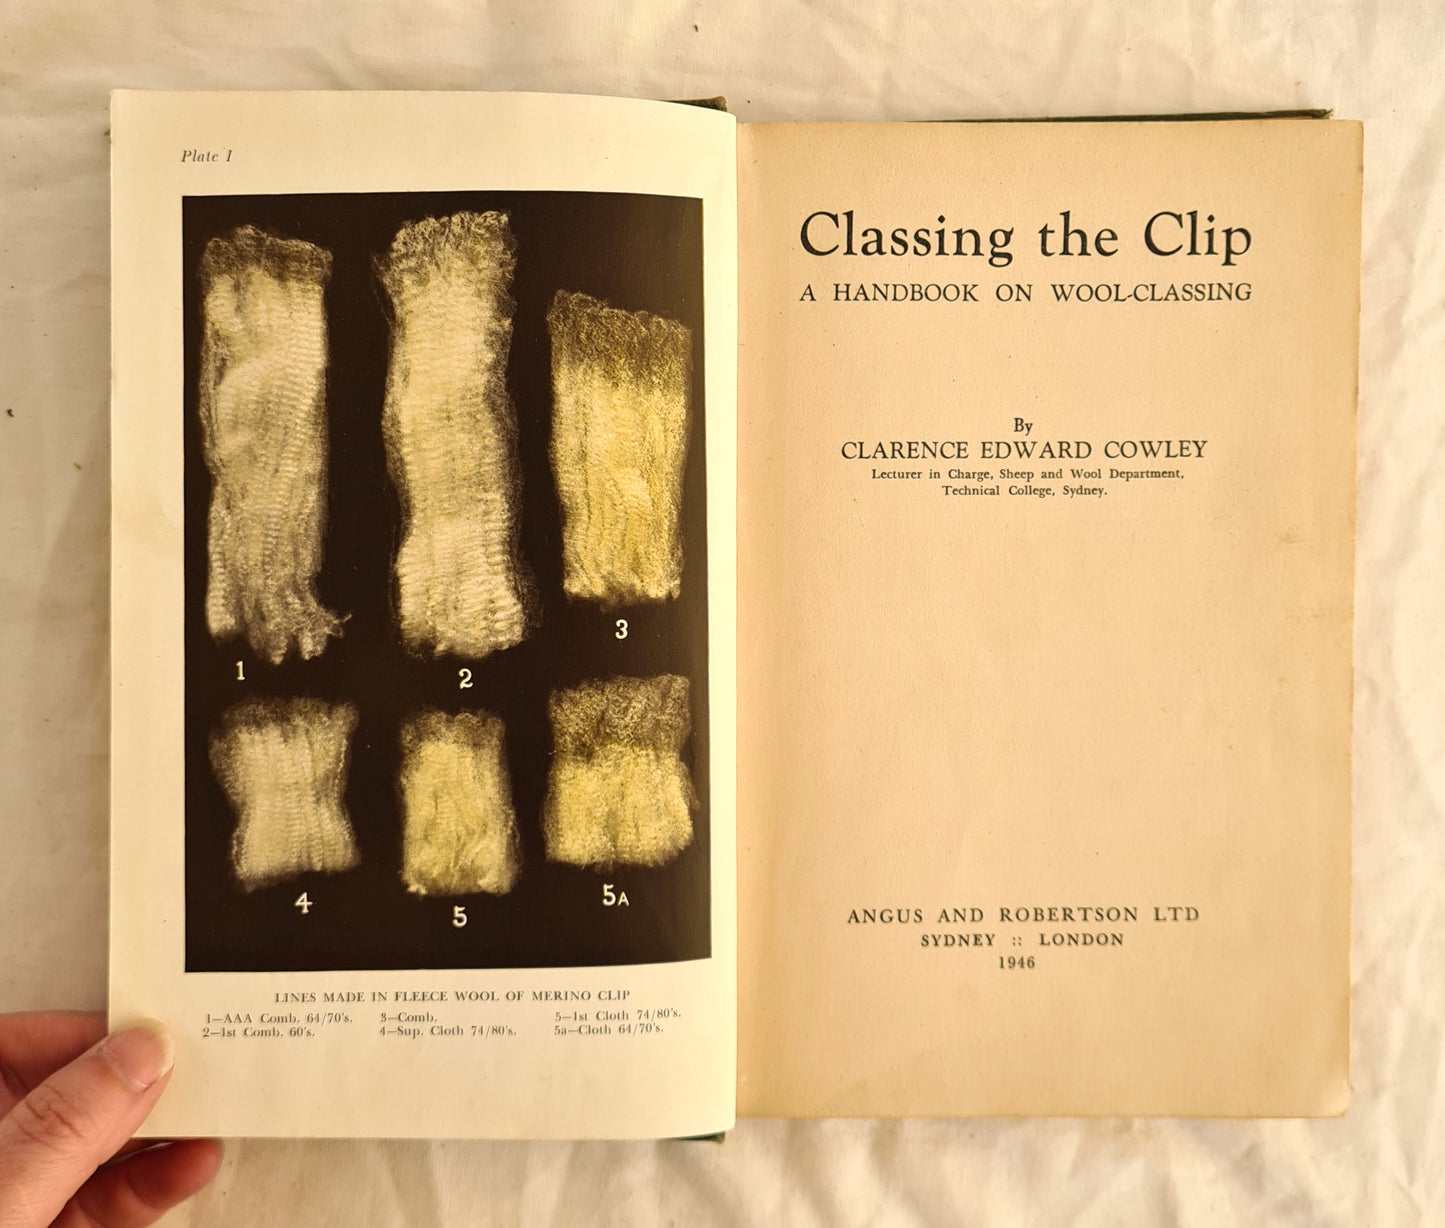 Classing the Clip  A Handbook on Wool-Classing  by Clarence Edward Cowley